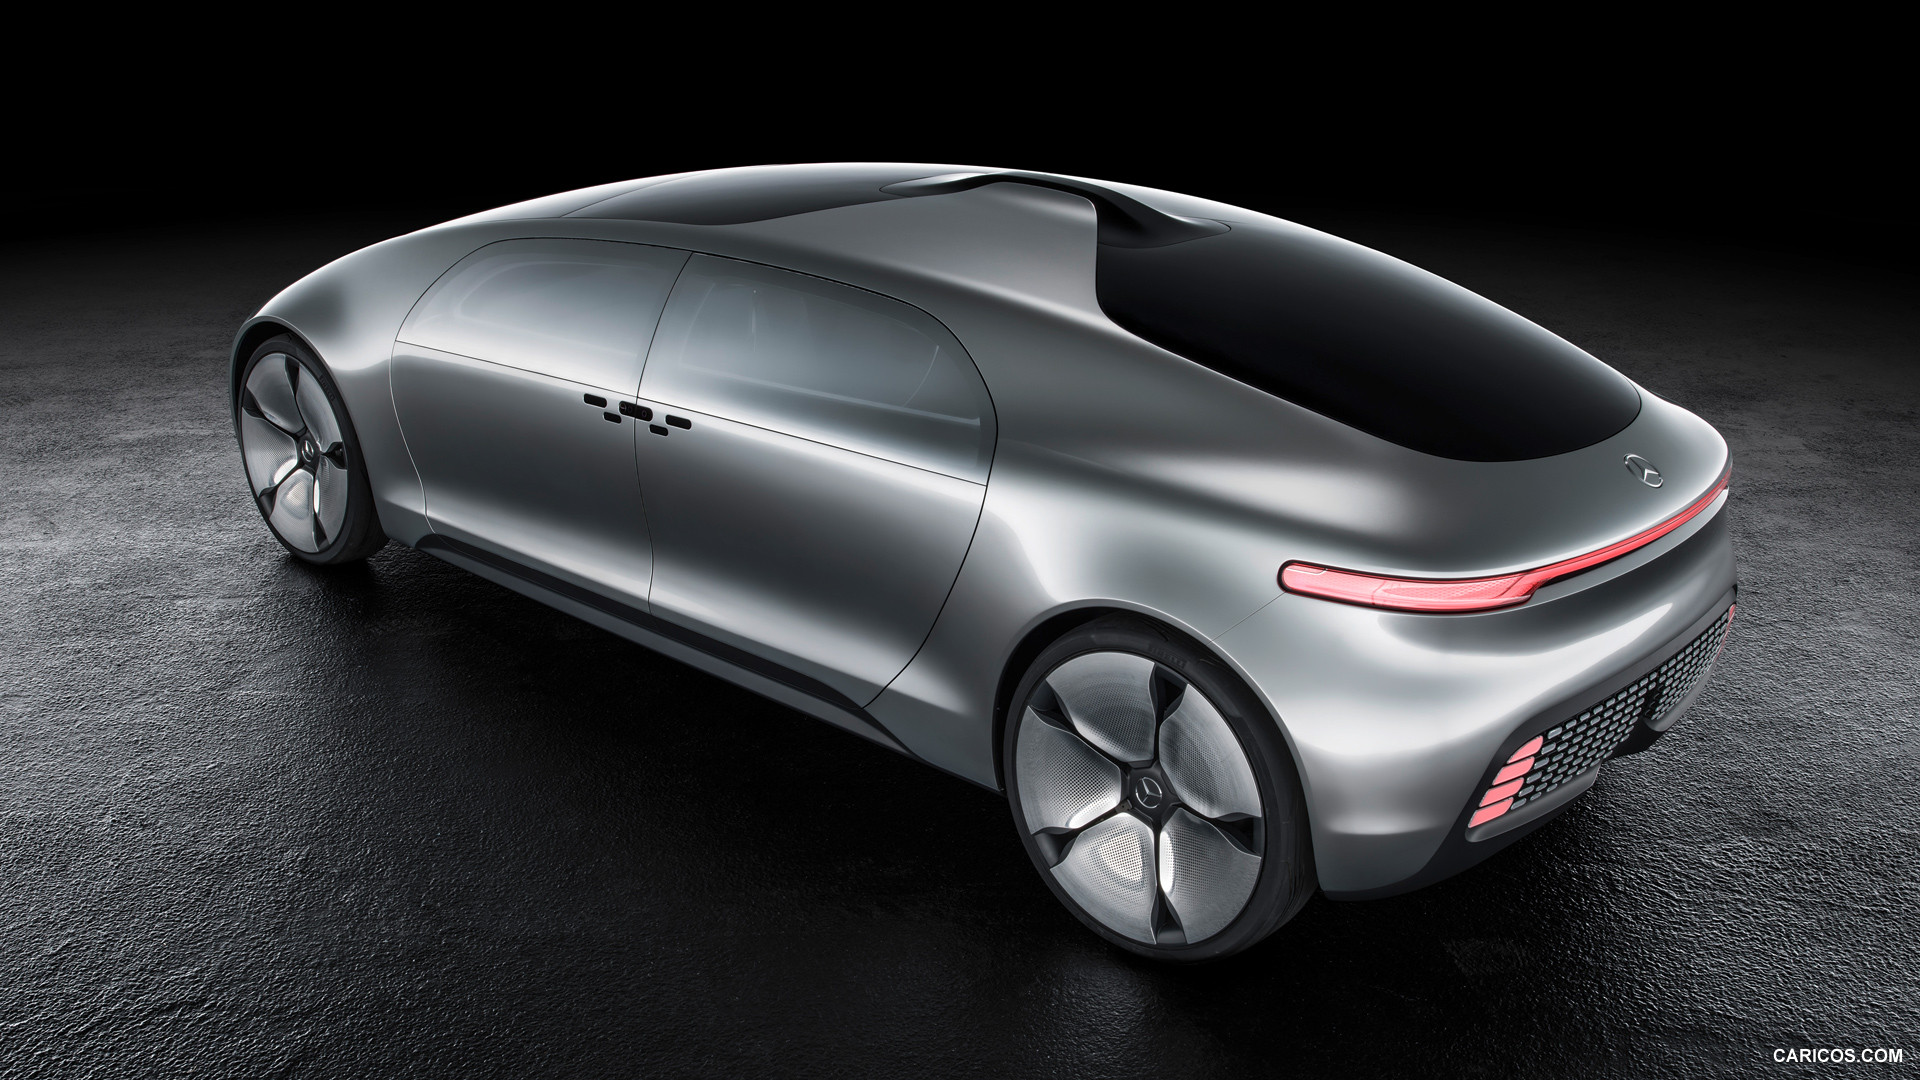 2015 Mercedes-Benz F 015 Luxury in Motion Concept  - Rear, #50 of 92